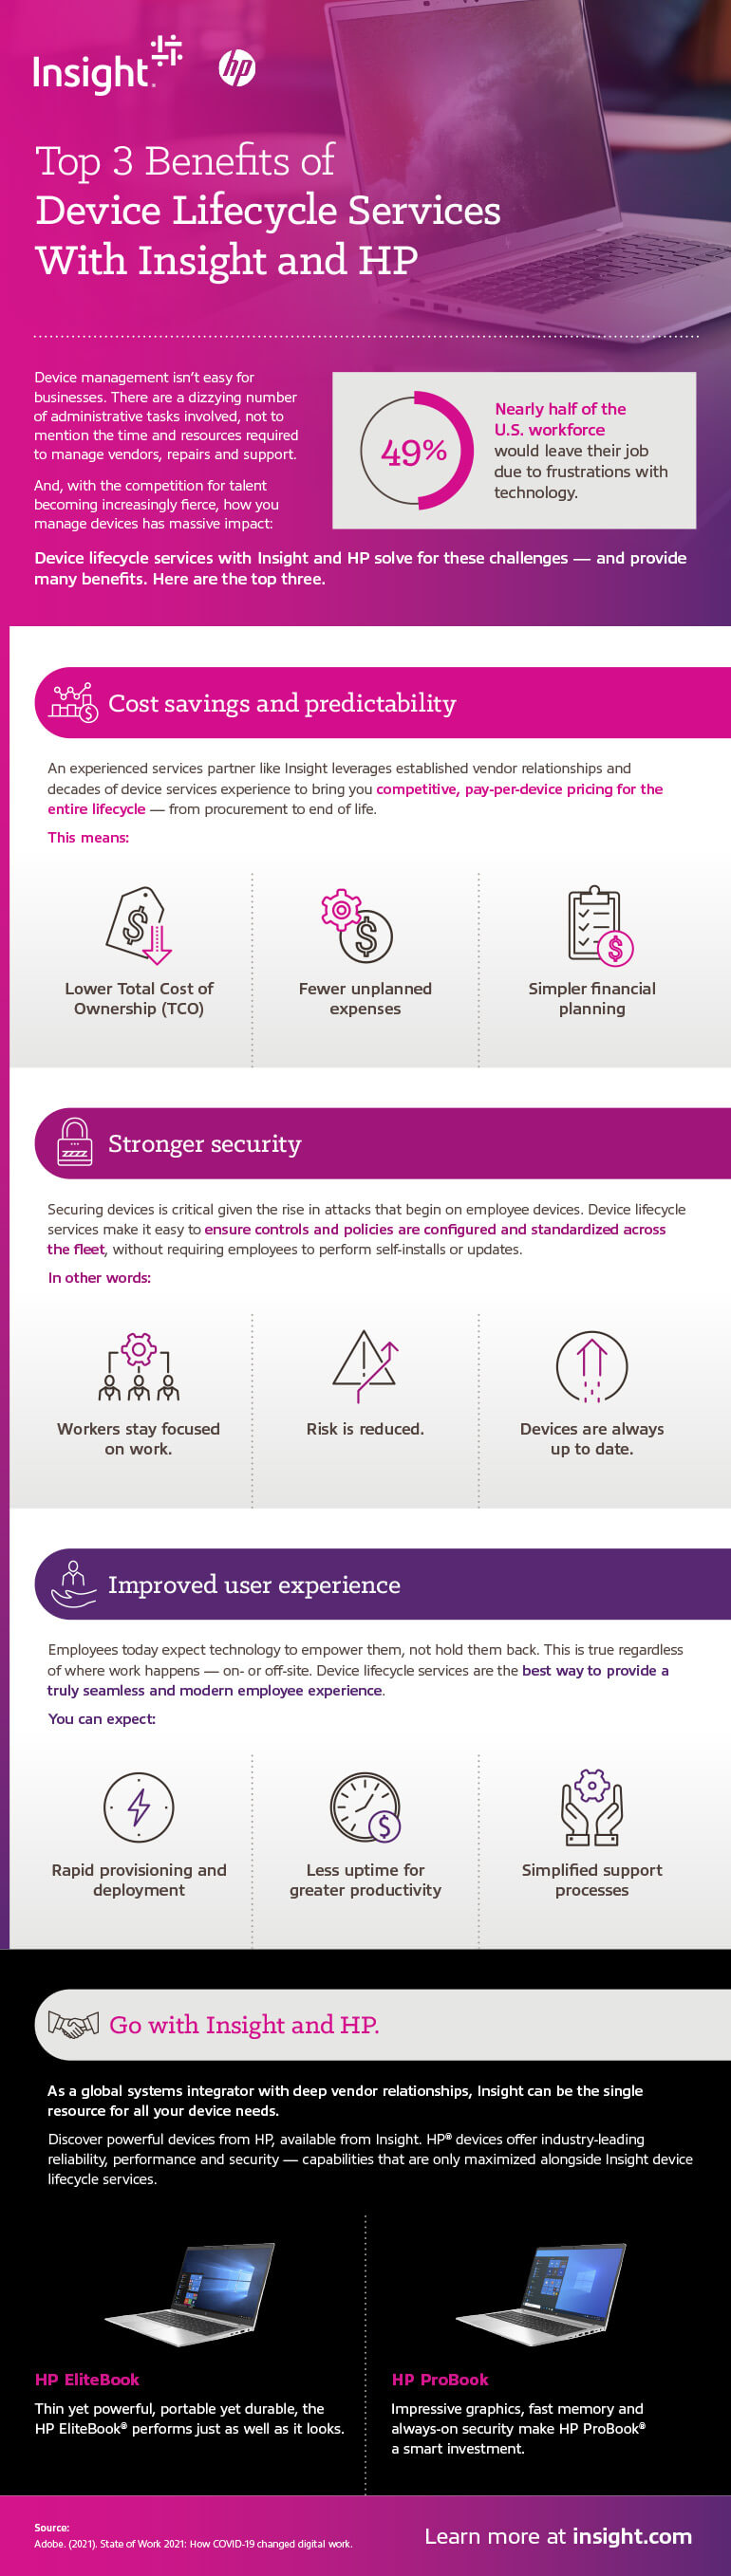 Top 3 Benefits of Device Lifecycle Services With Insight and HP infographic 